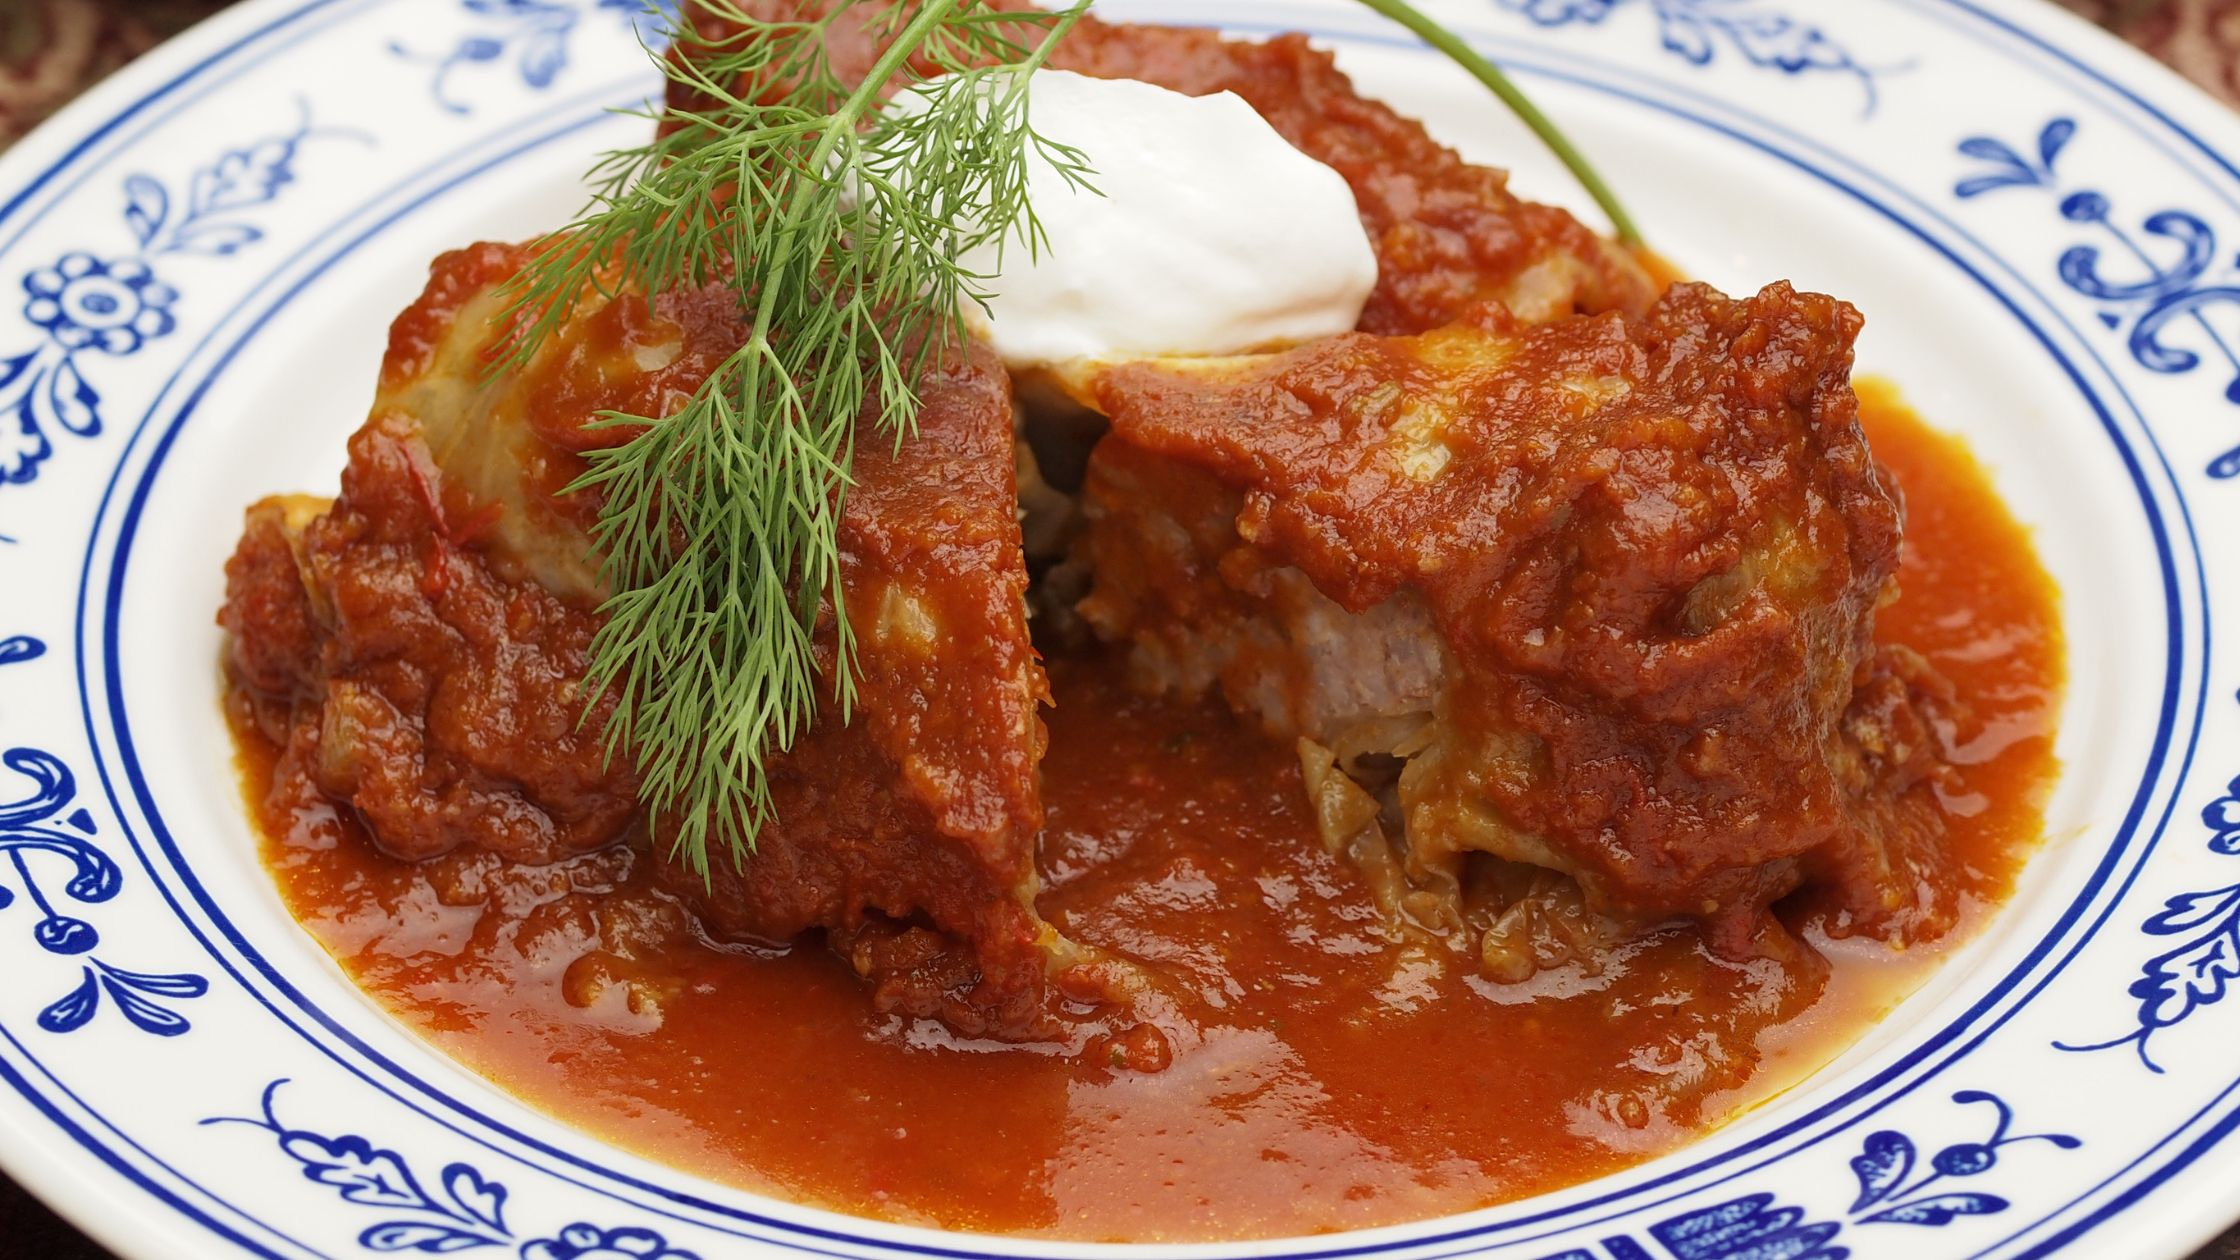 Gołąbki are served with a rich tomato sauce